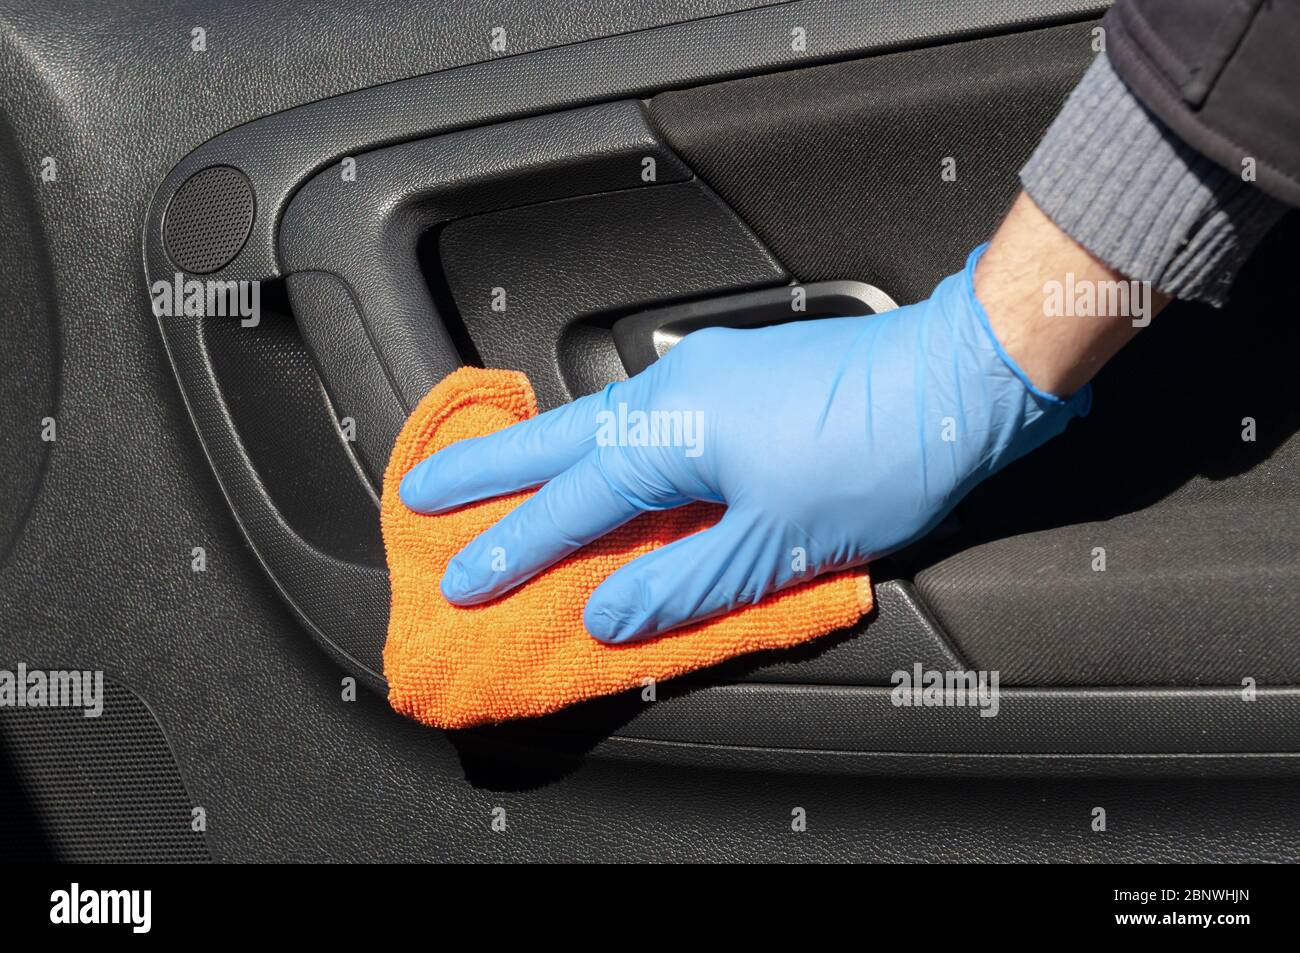 Hand of driver in blue protective glove is wiping with a cloth an interior handle of car door. Coronavirus or Covid-19 car disinfection Stock Photo